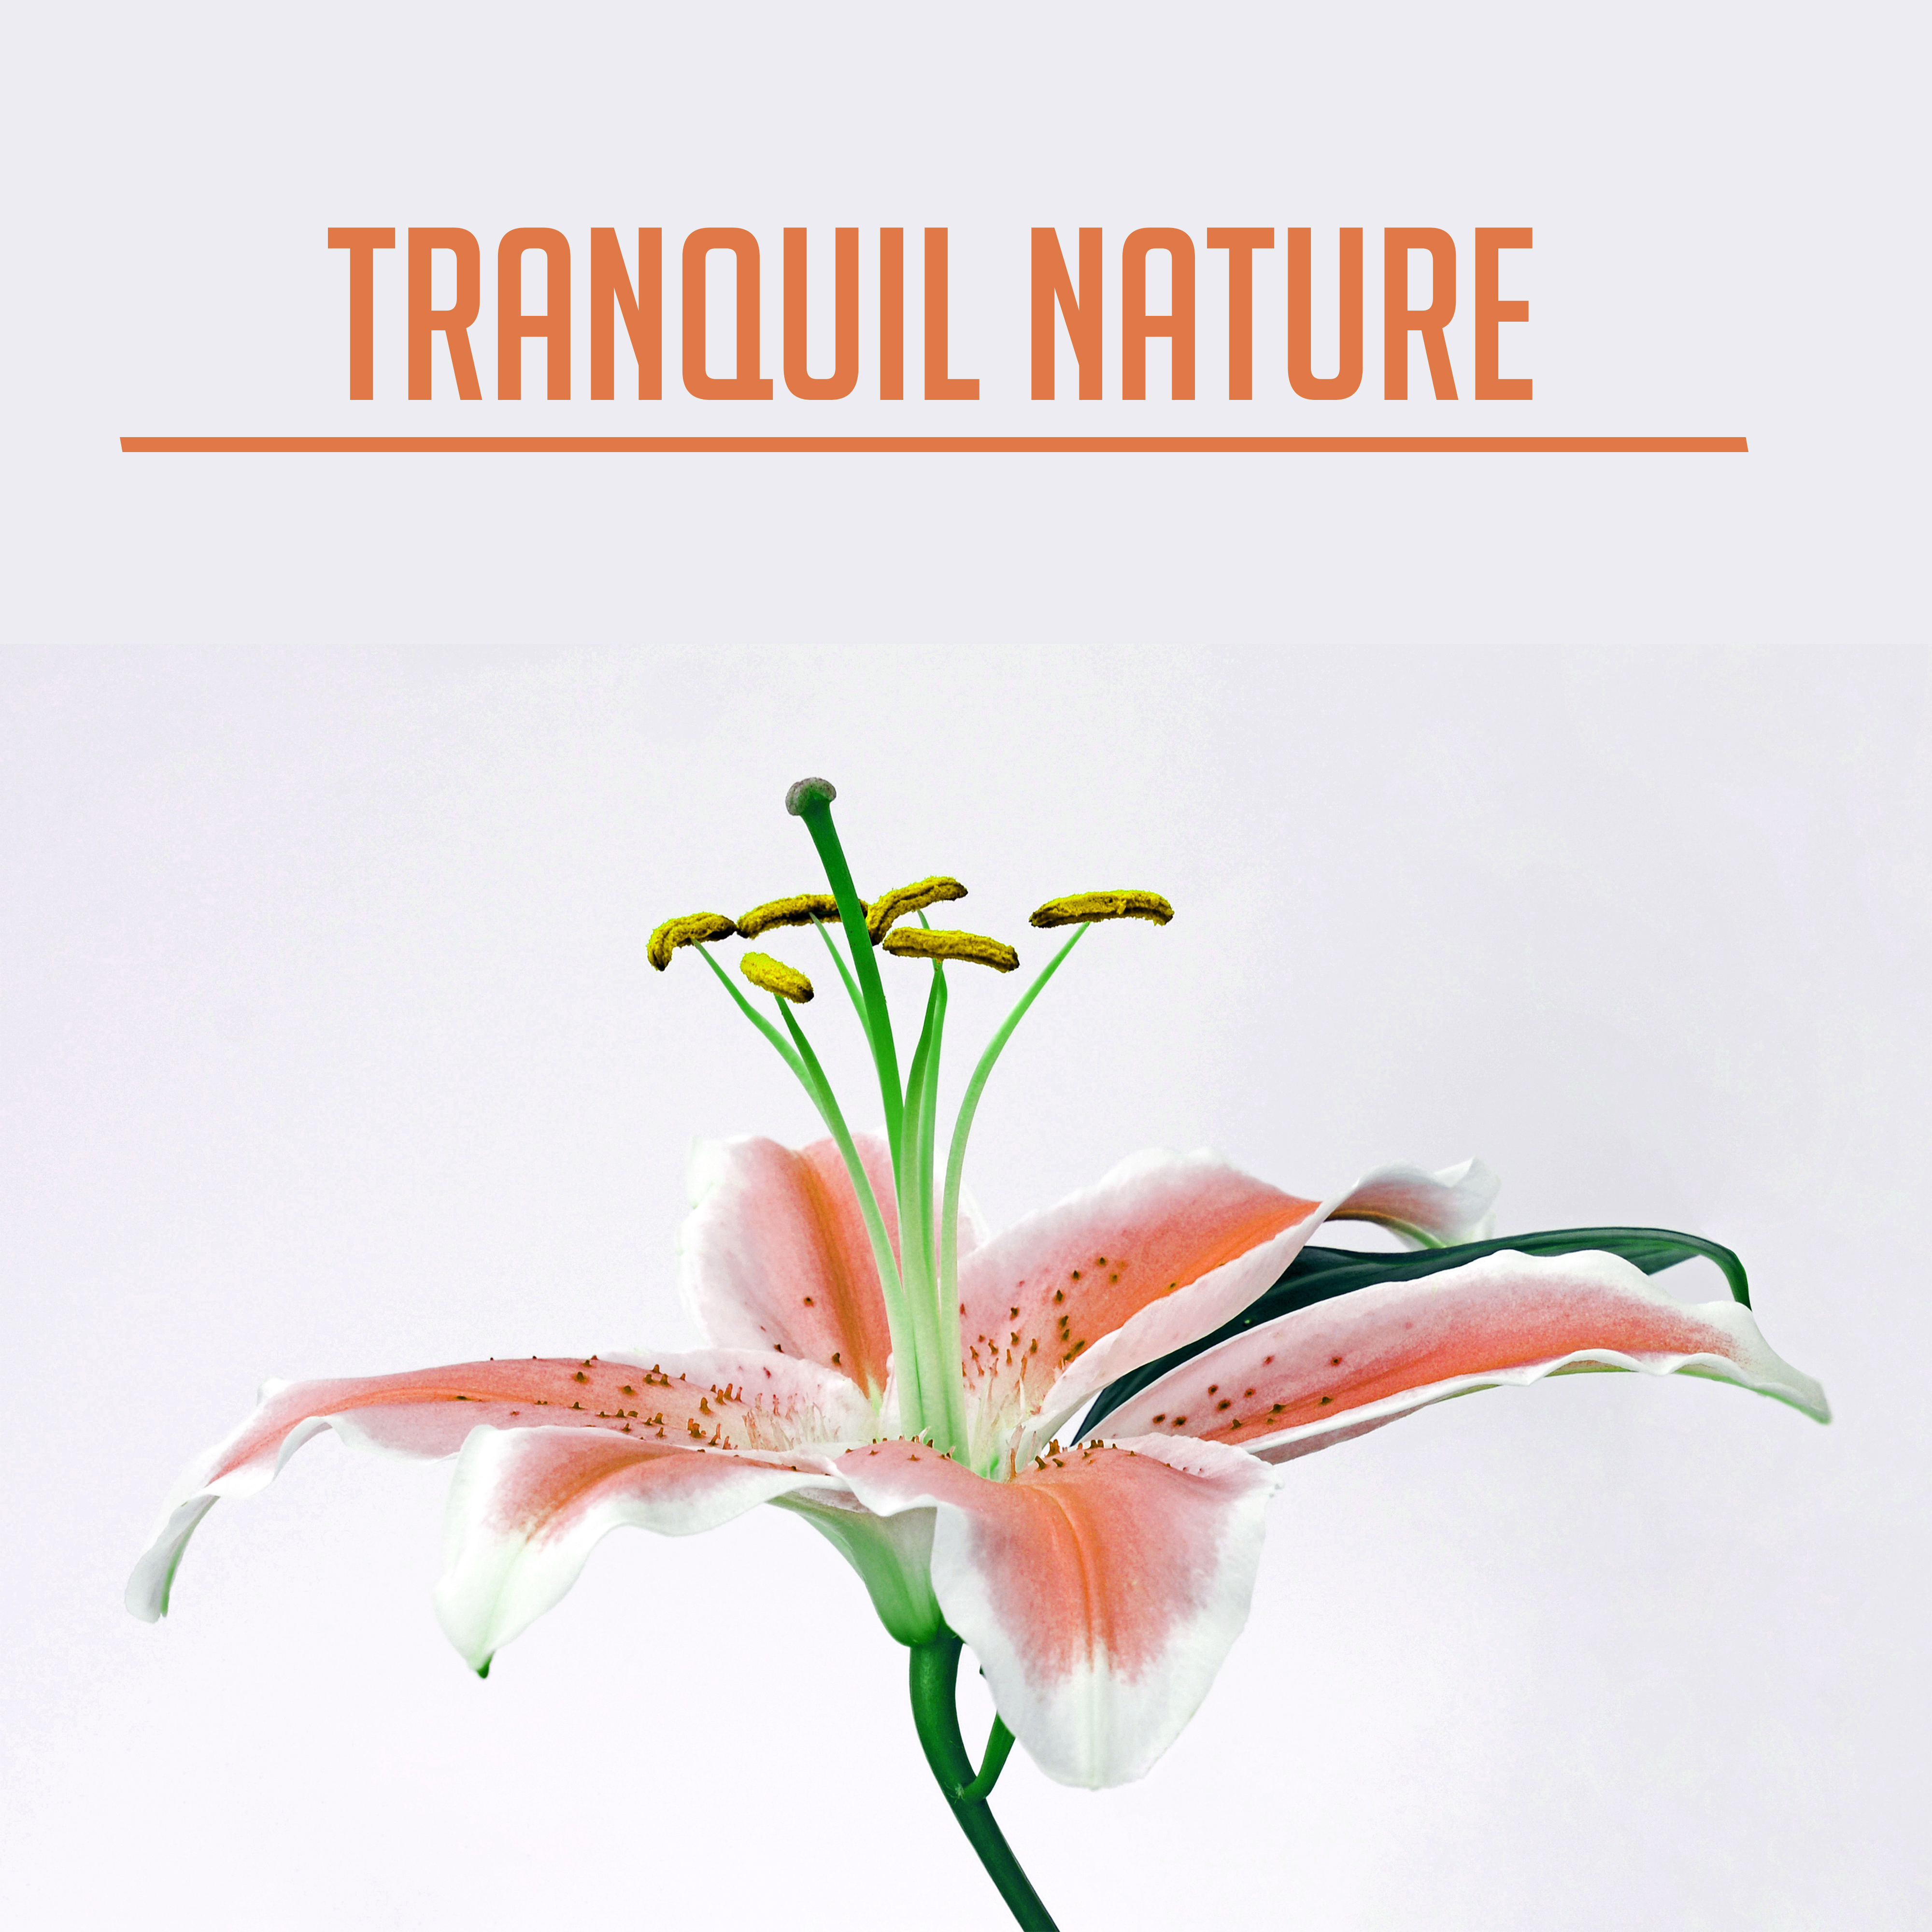 Tranquil Nature – Peaceful Music for Relaxation, Sleep, Healing, Zen Music, Deep Relief, Calmness & Harmony, Soothing Piano